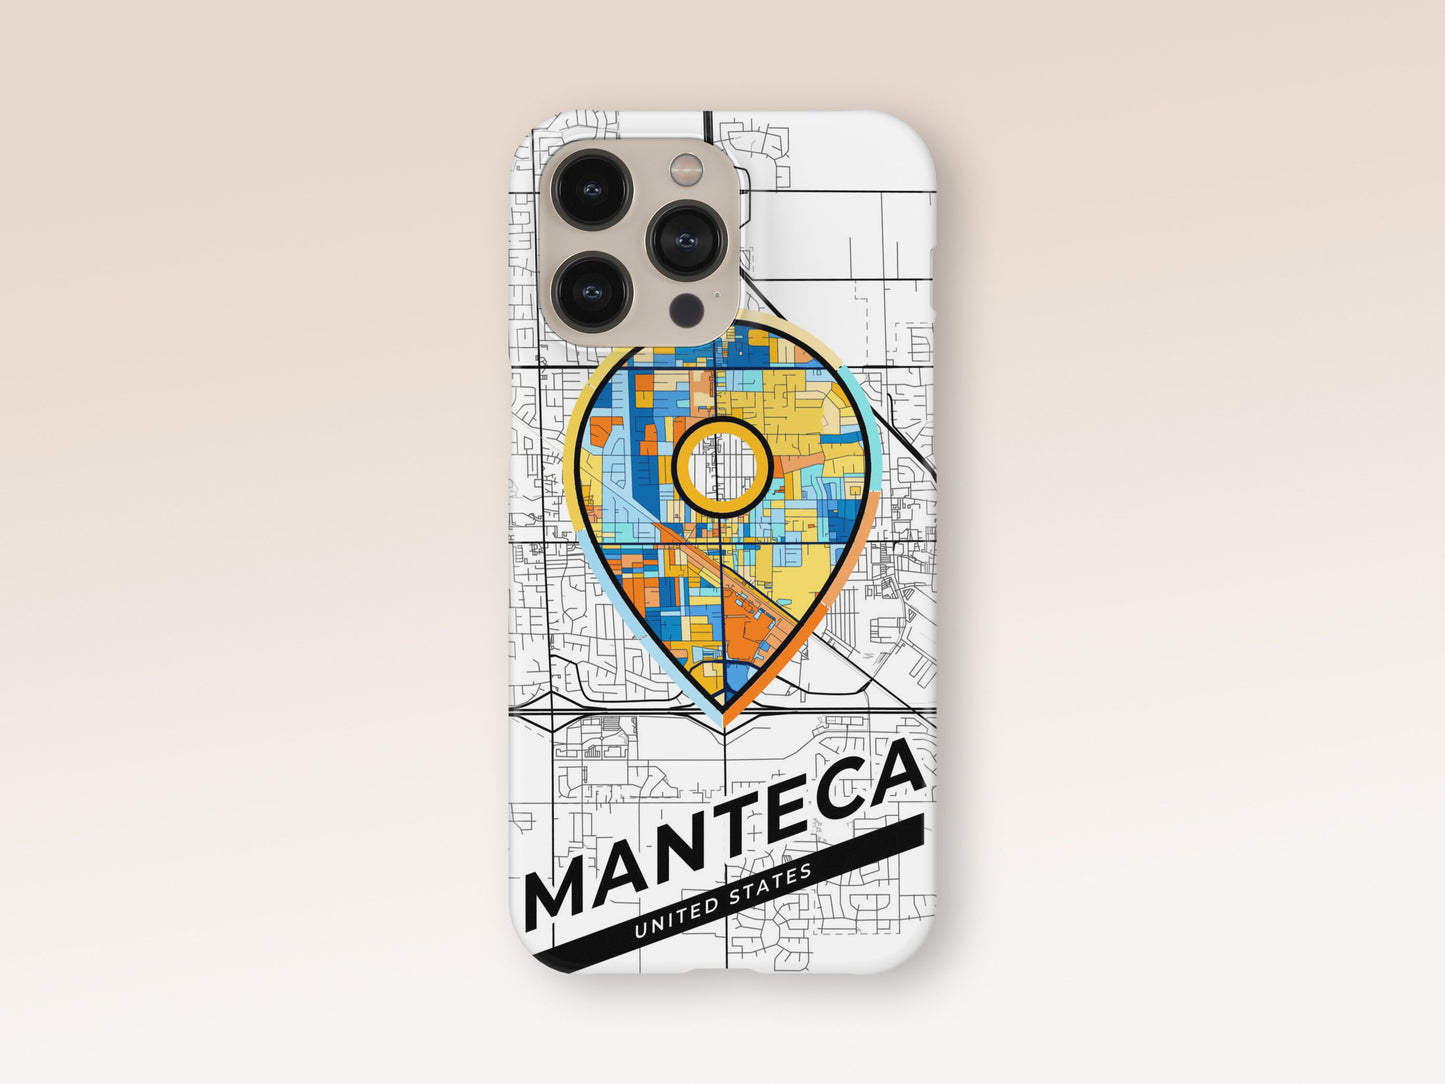 Manteca California slim phone case with colorful icon. Birthday, wedding or housewarming gift. Couple match cases. 1